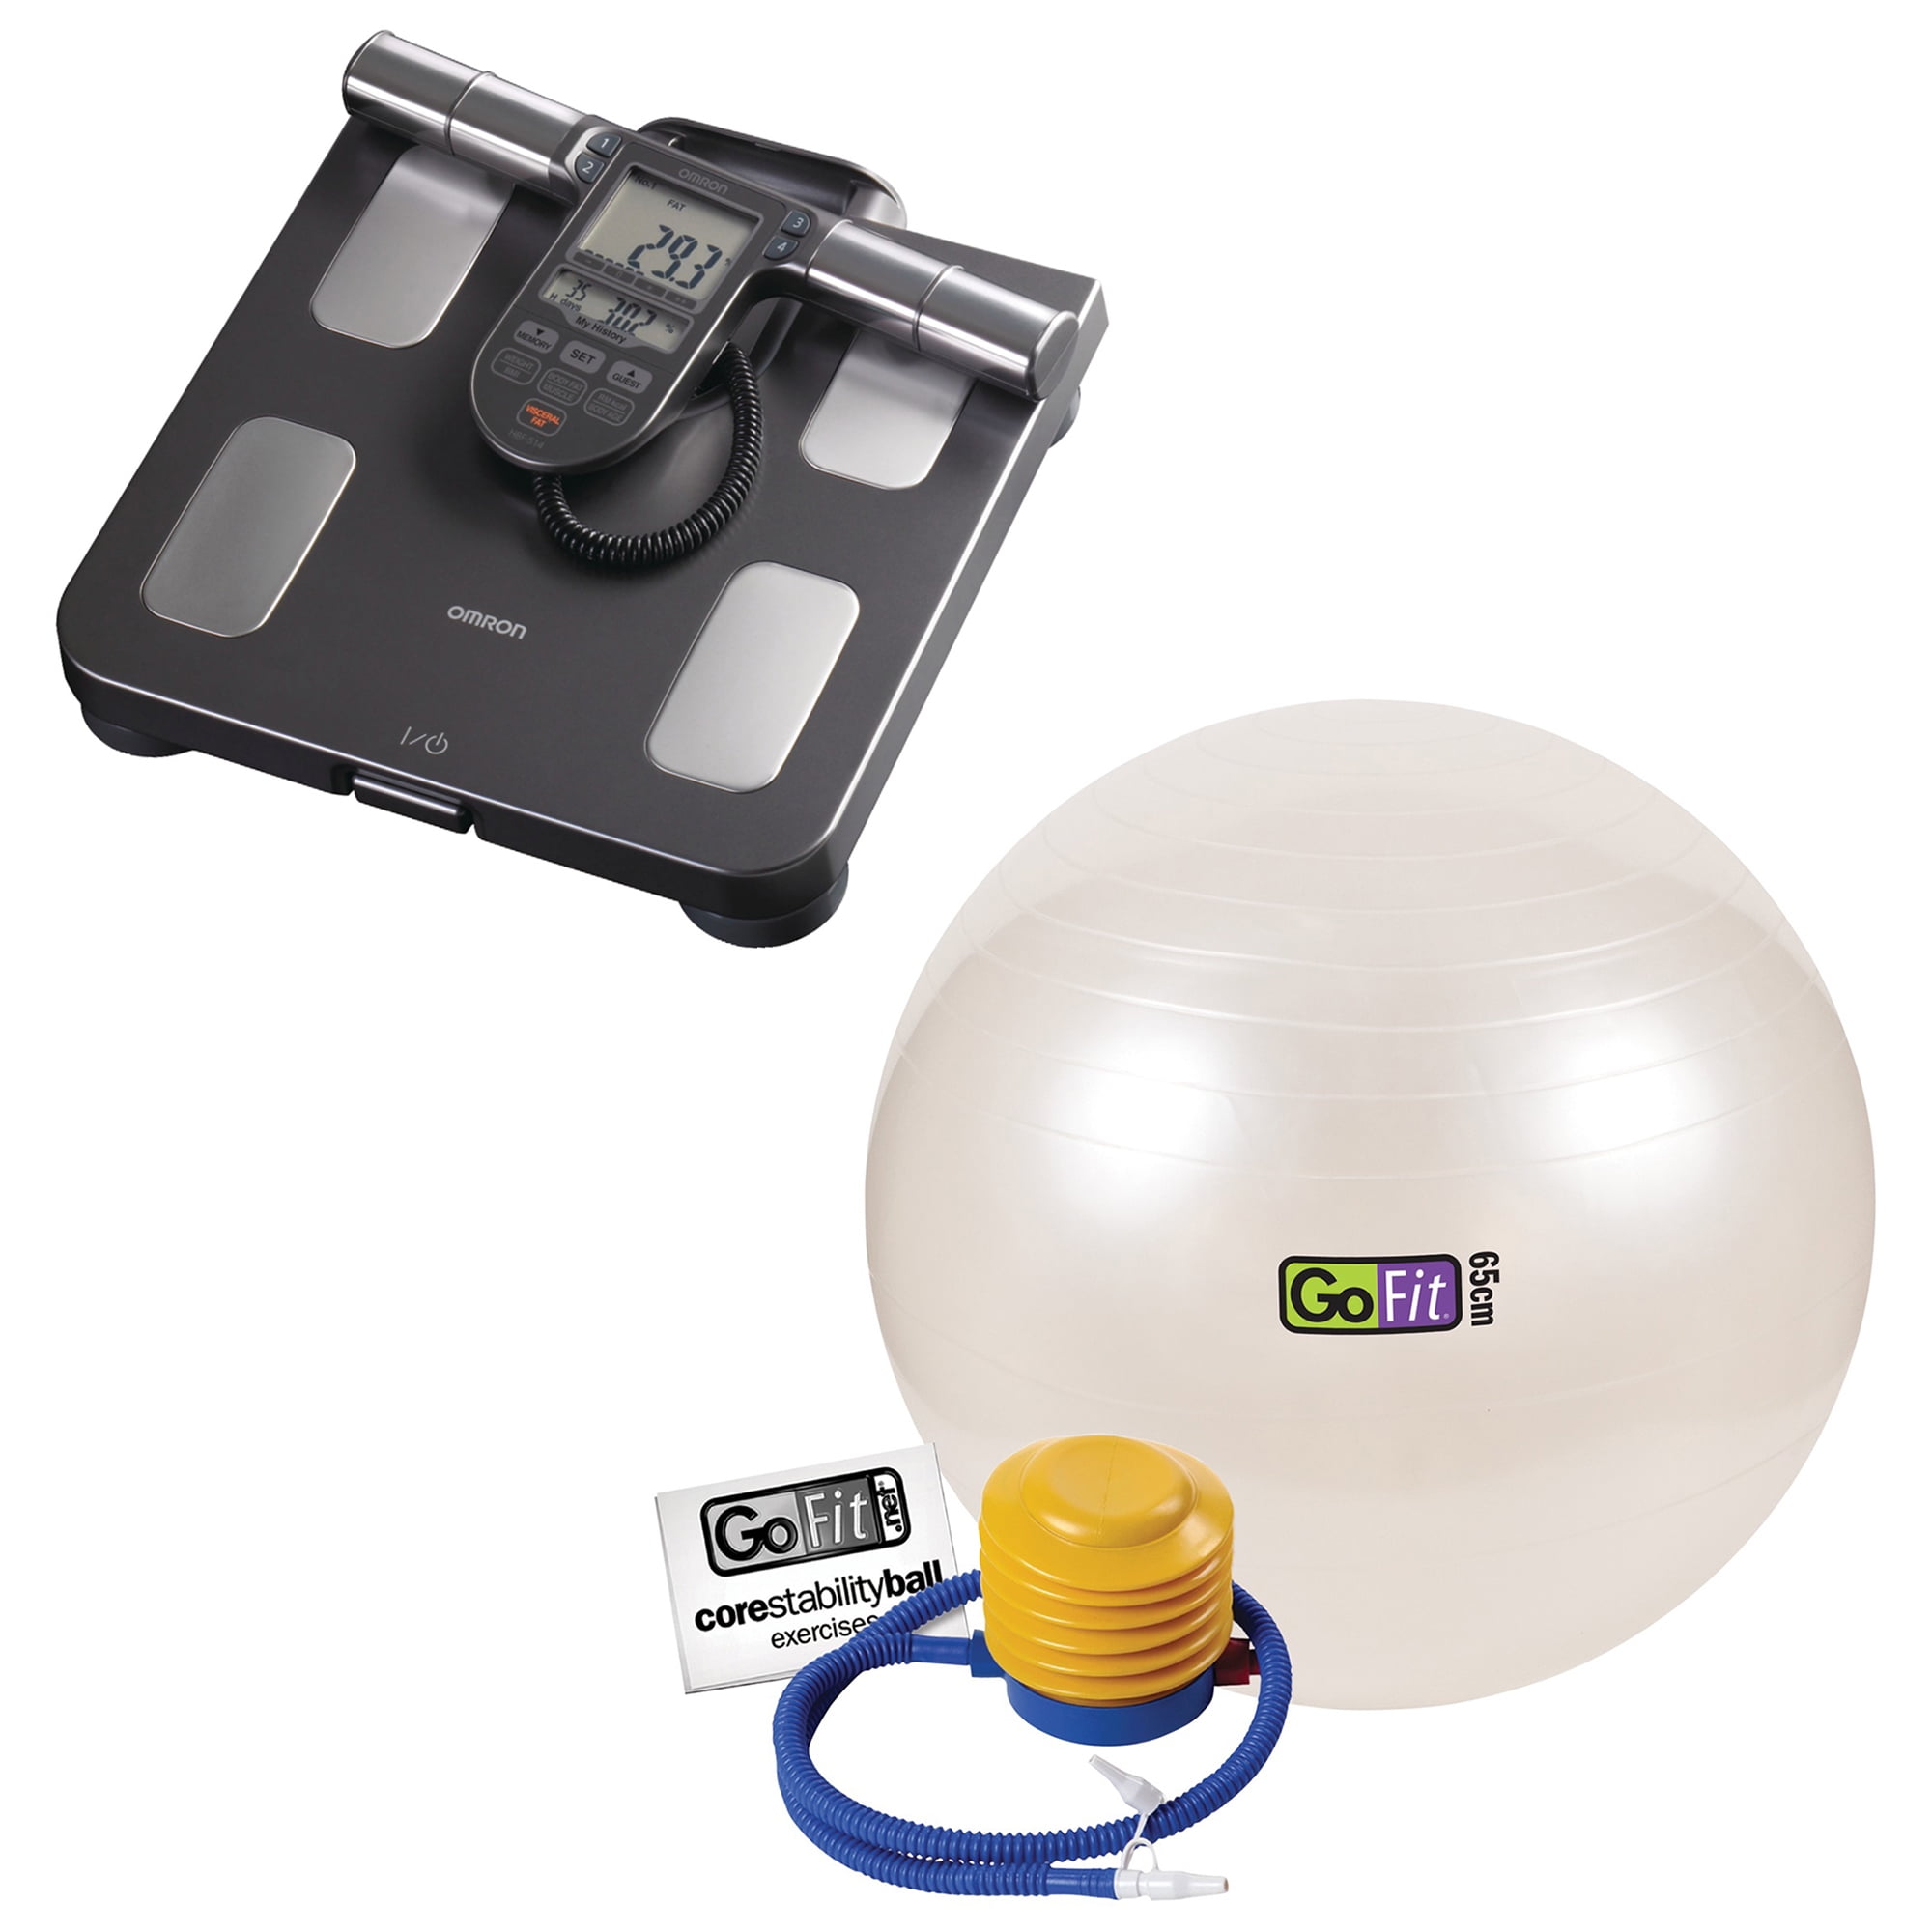 GoFit Gf-65 Ball Exercise Ball with Pump (65 cm; White) and Omron HBF-514C Full-Body Composition Monitor Black Bathroom Scale